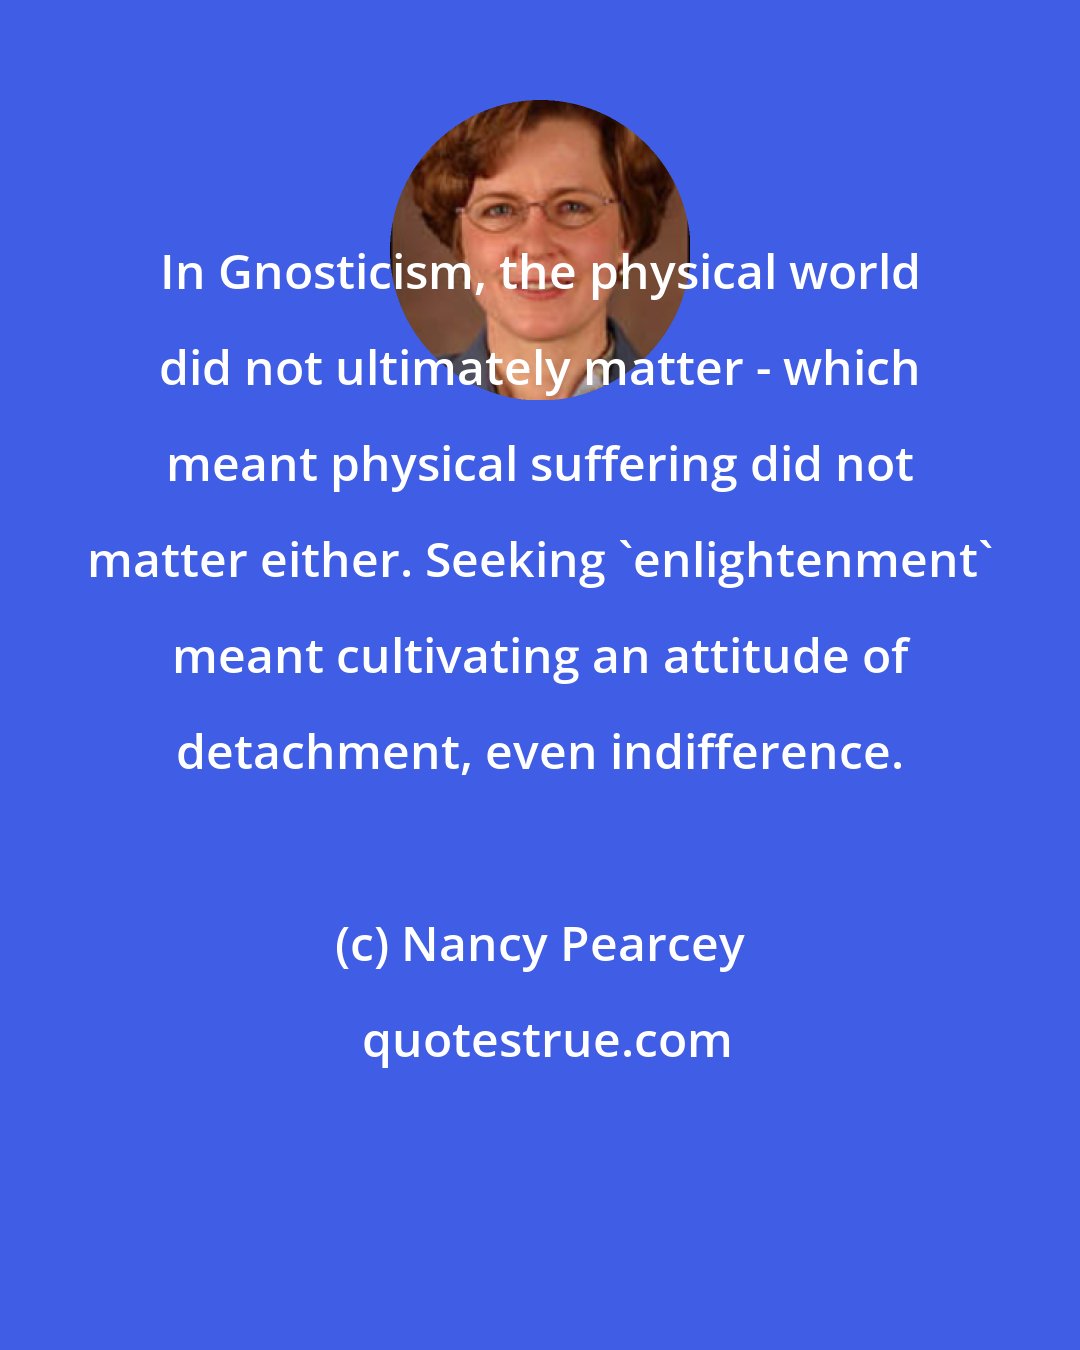 Nancy Pearcey: In Gnosticism, the physical world did not ultimately matter - which meant physical suffering did not matter either. Seeking 'enlightenment' meant cultivating an attitude of detachment, even indifference.